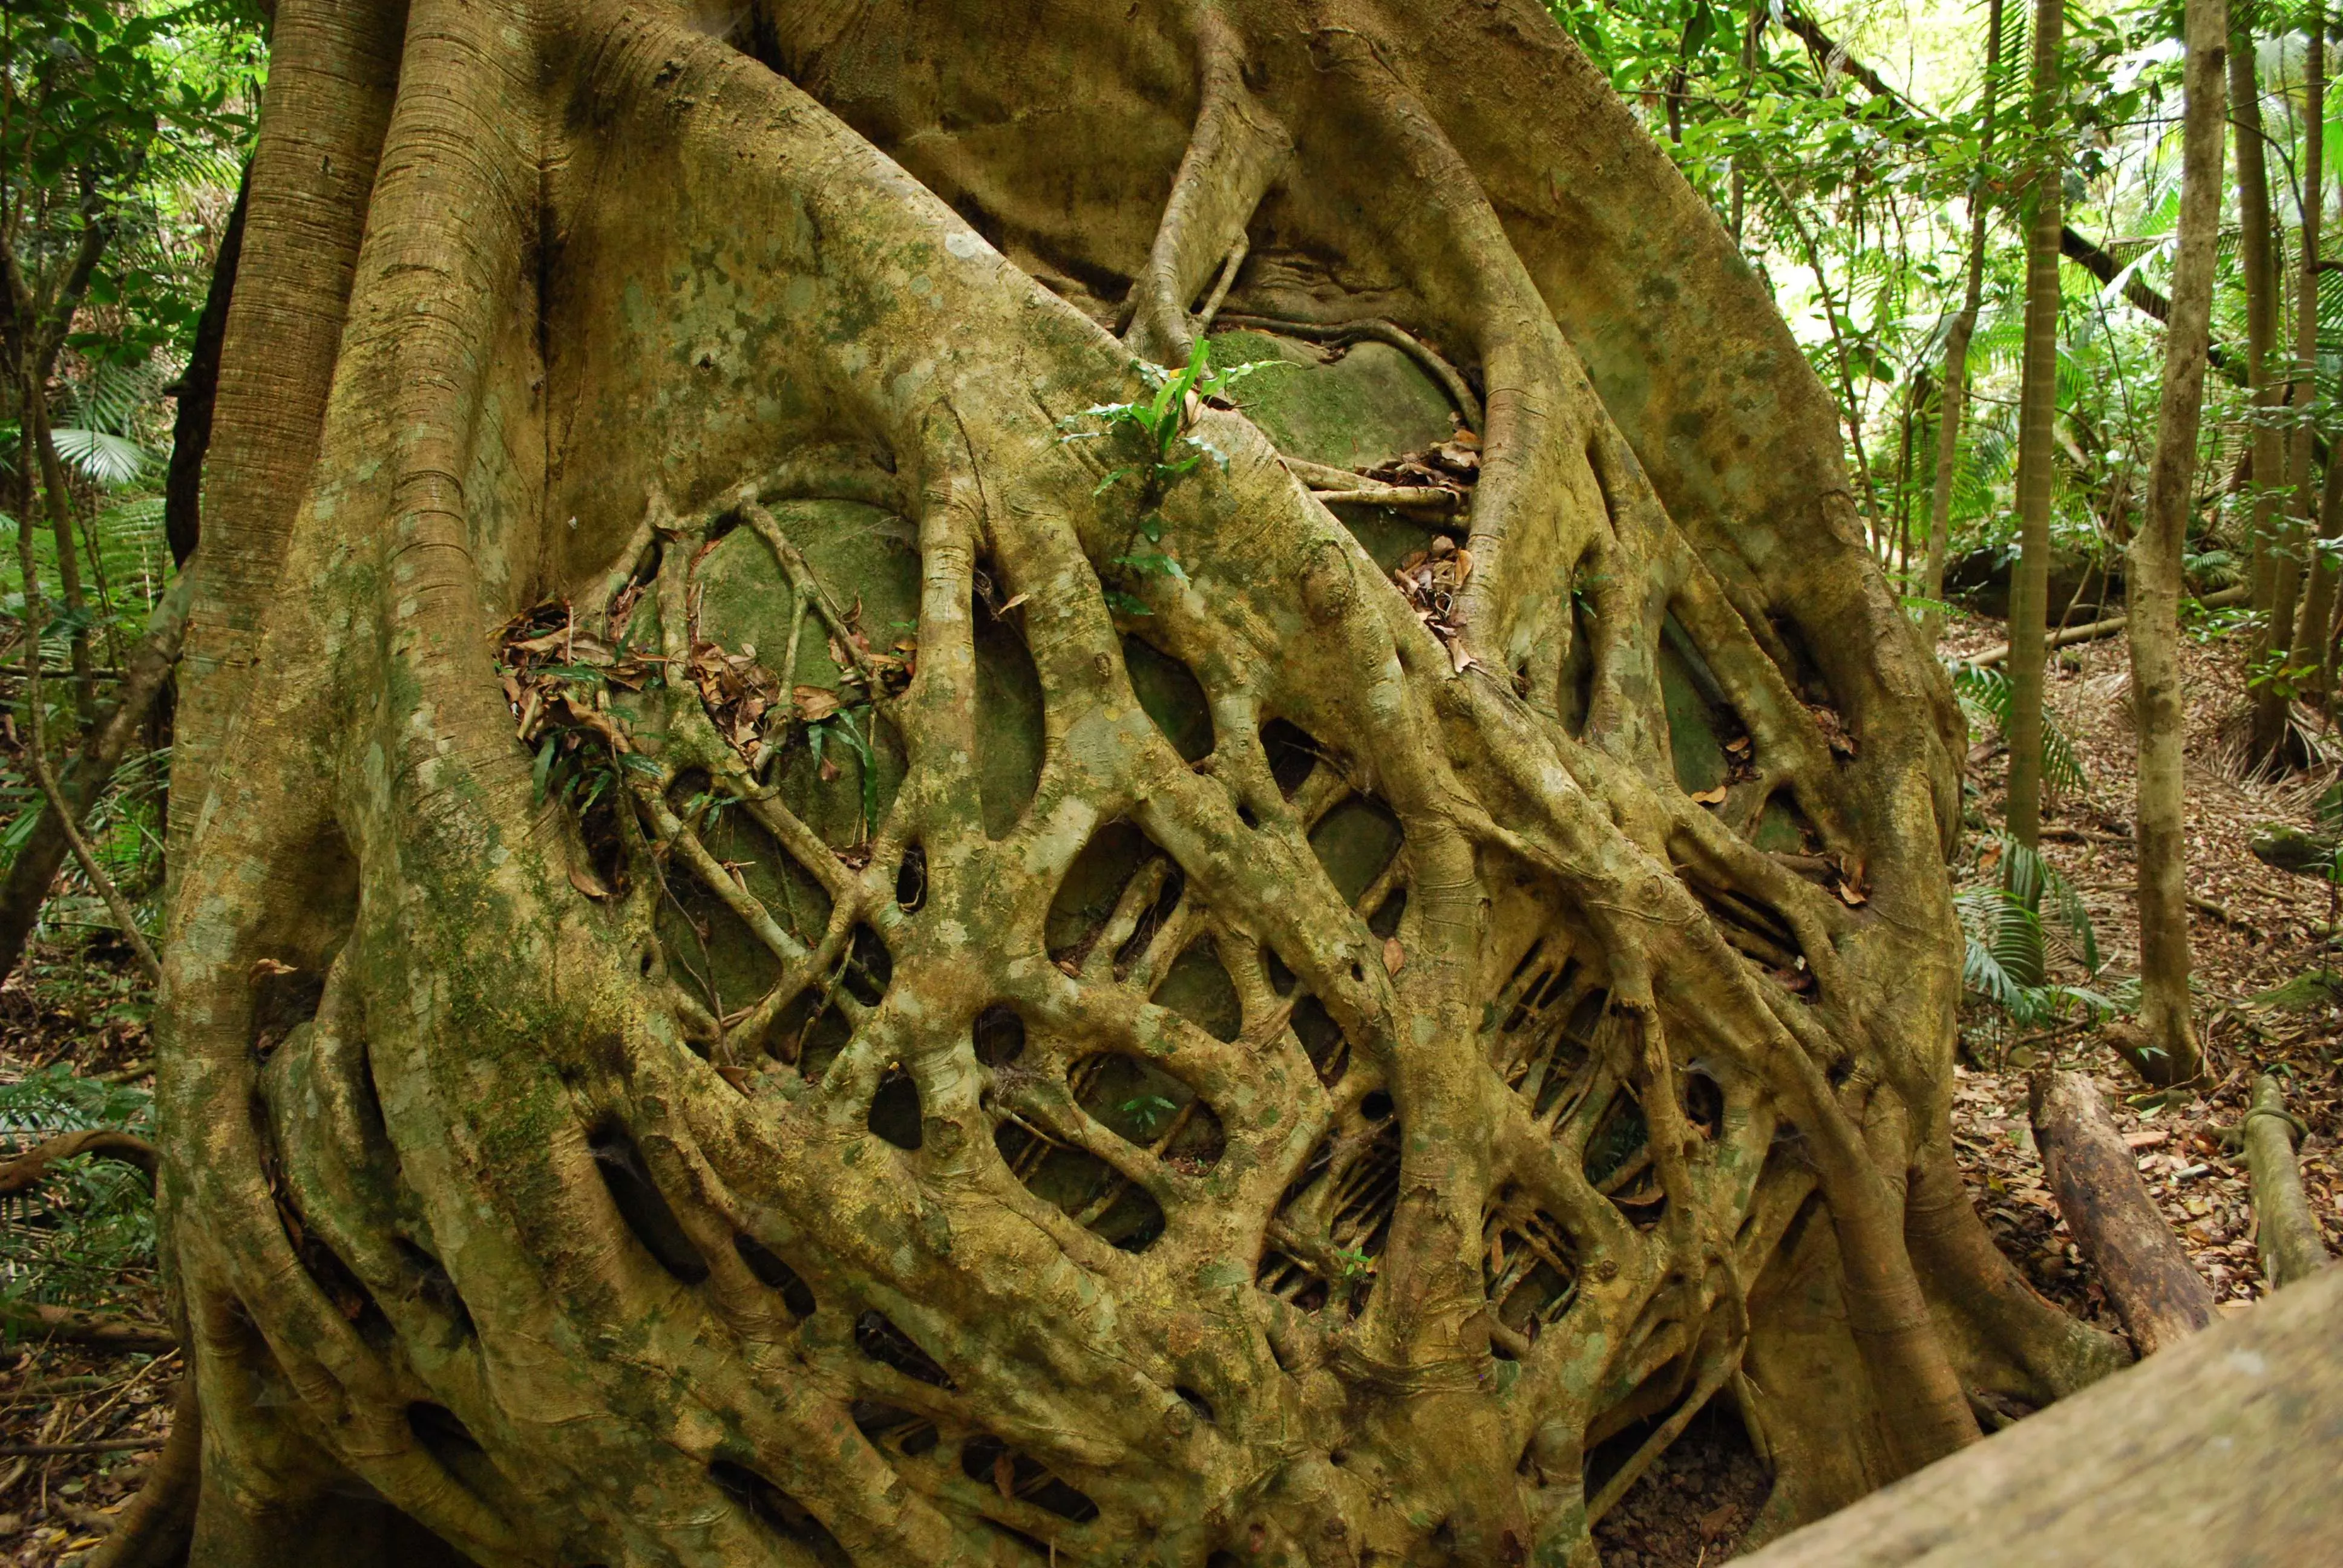 Plant roots wrapped around a boulder